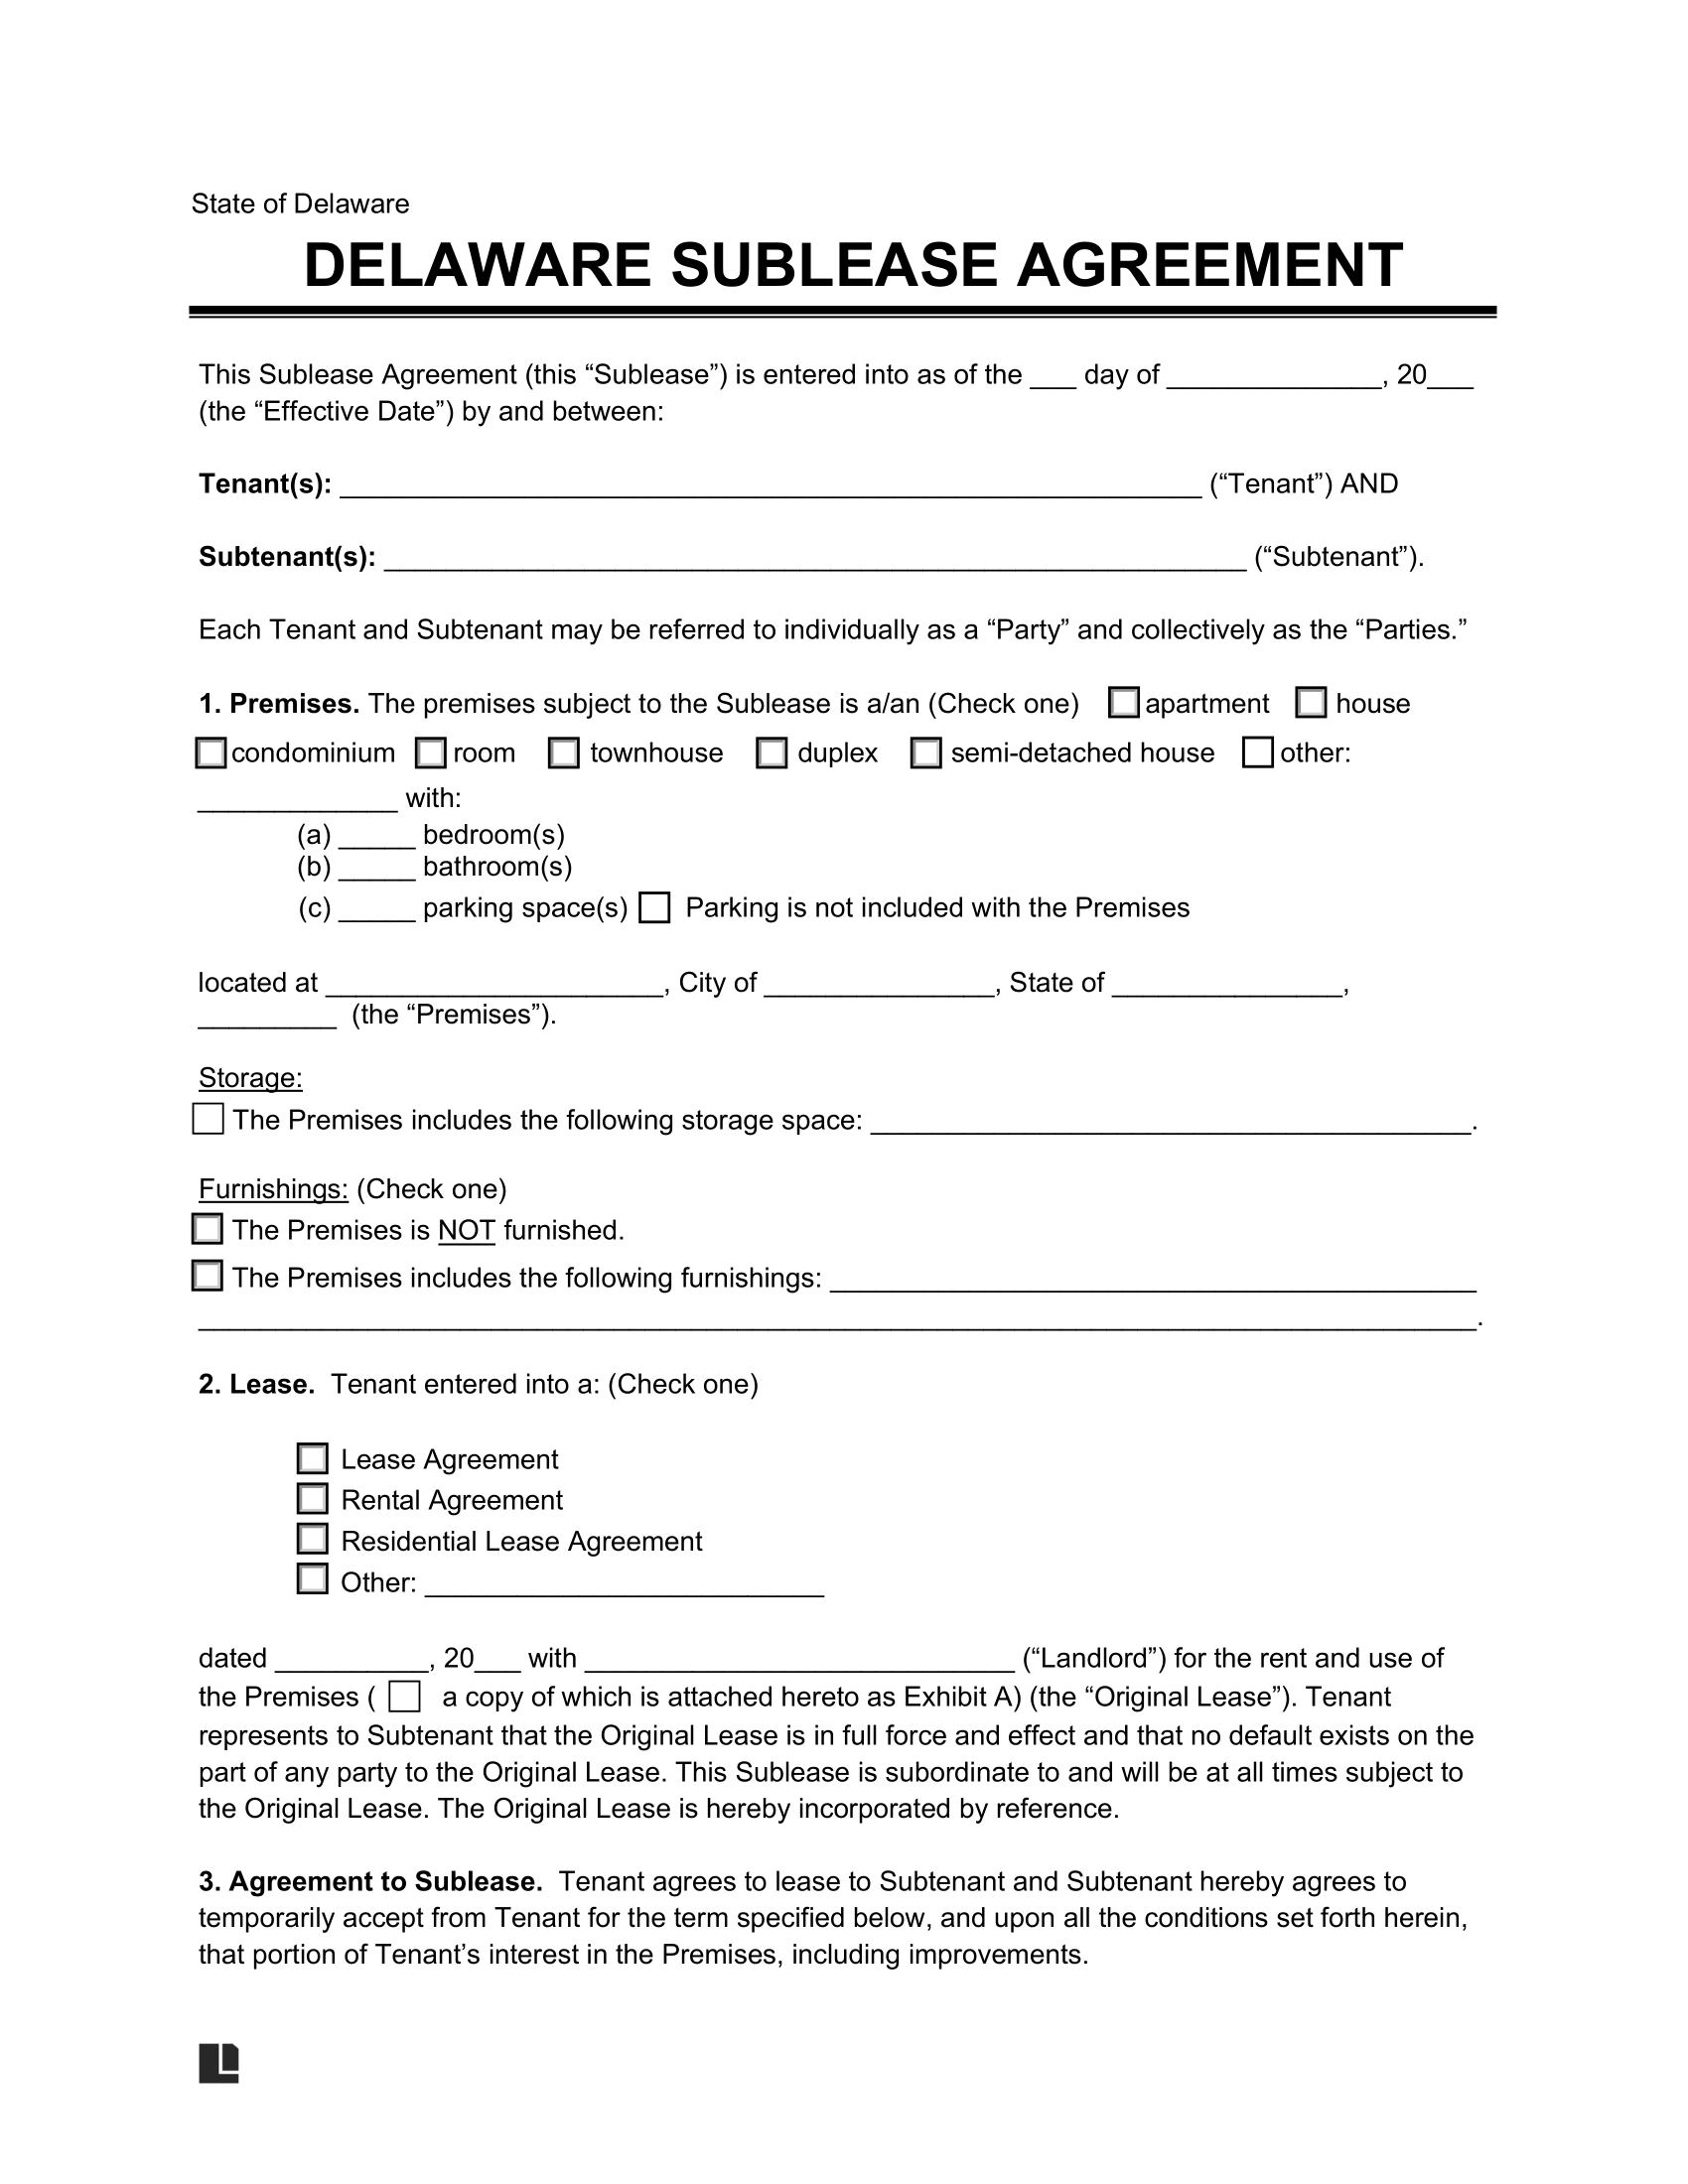 Delaware Sublease Agreement Template